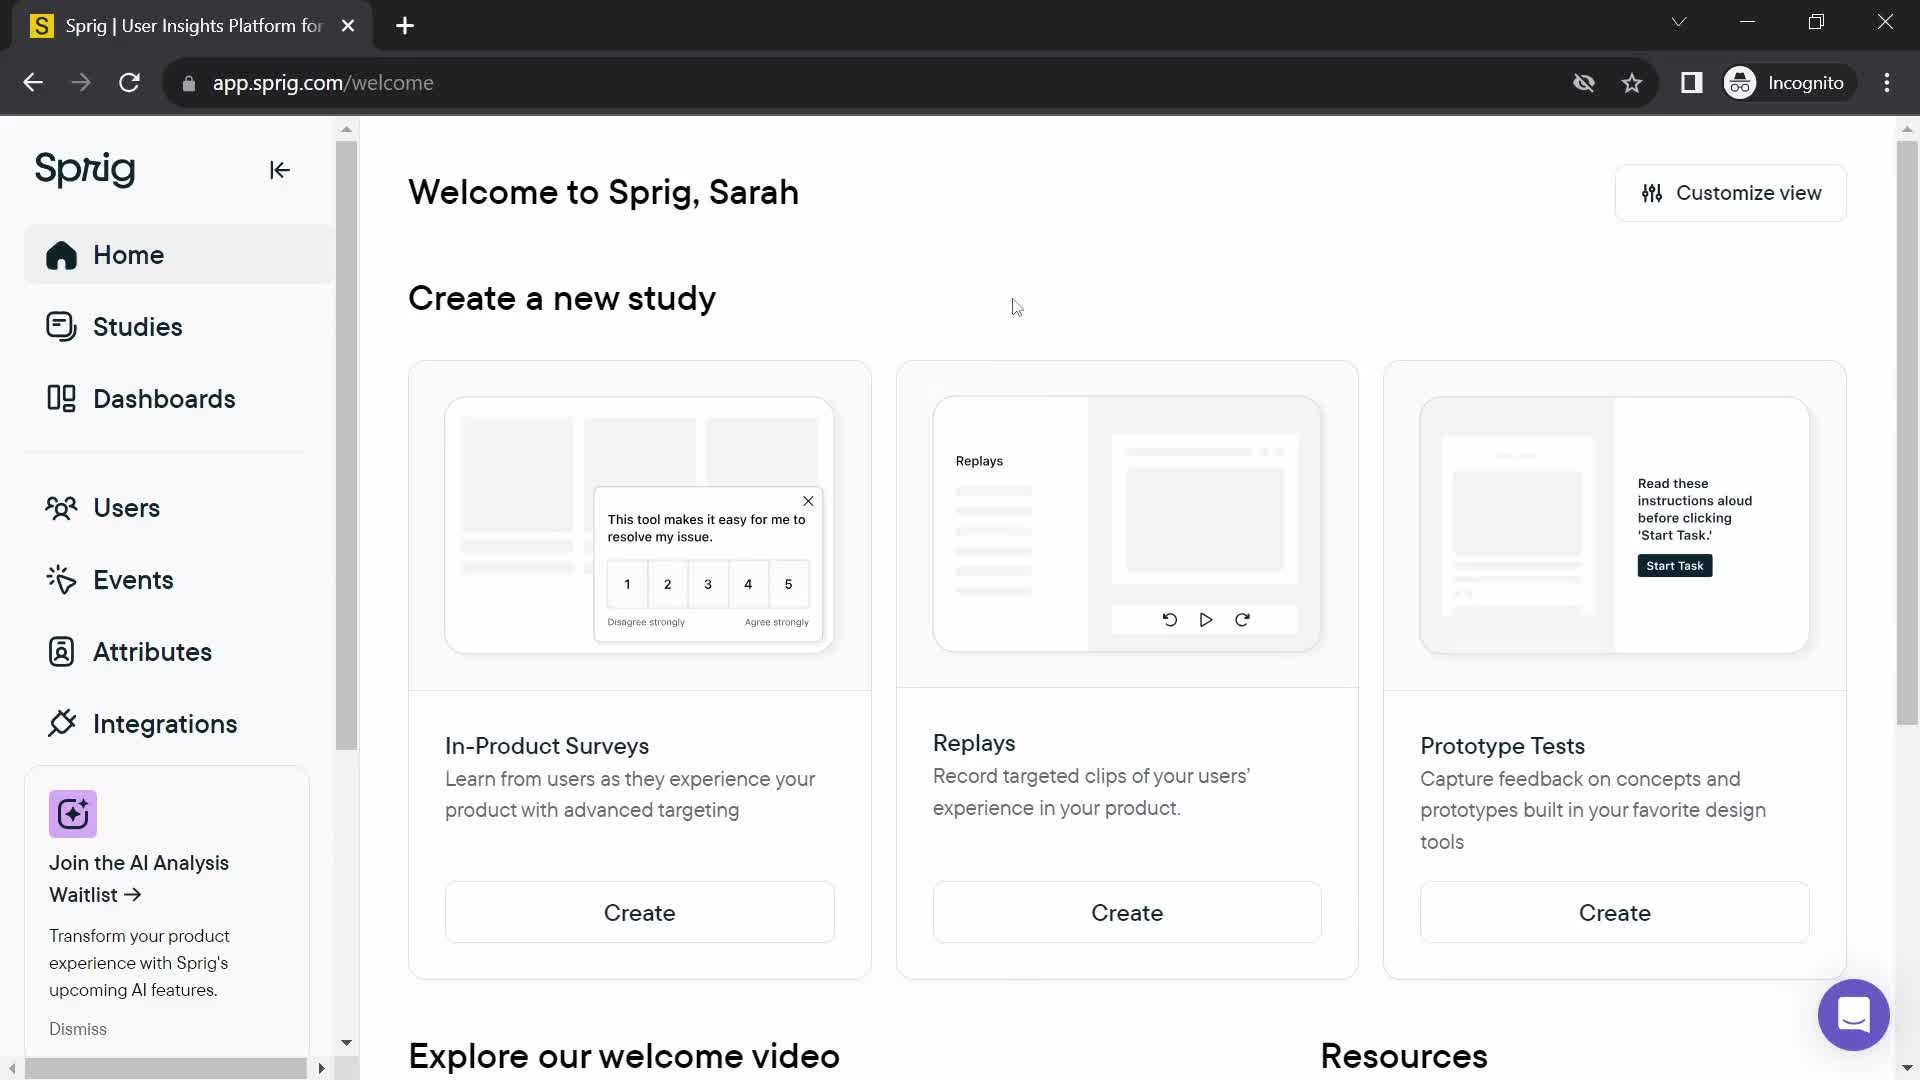 Screenshot of Home on Inviting people on Sprig user flow